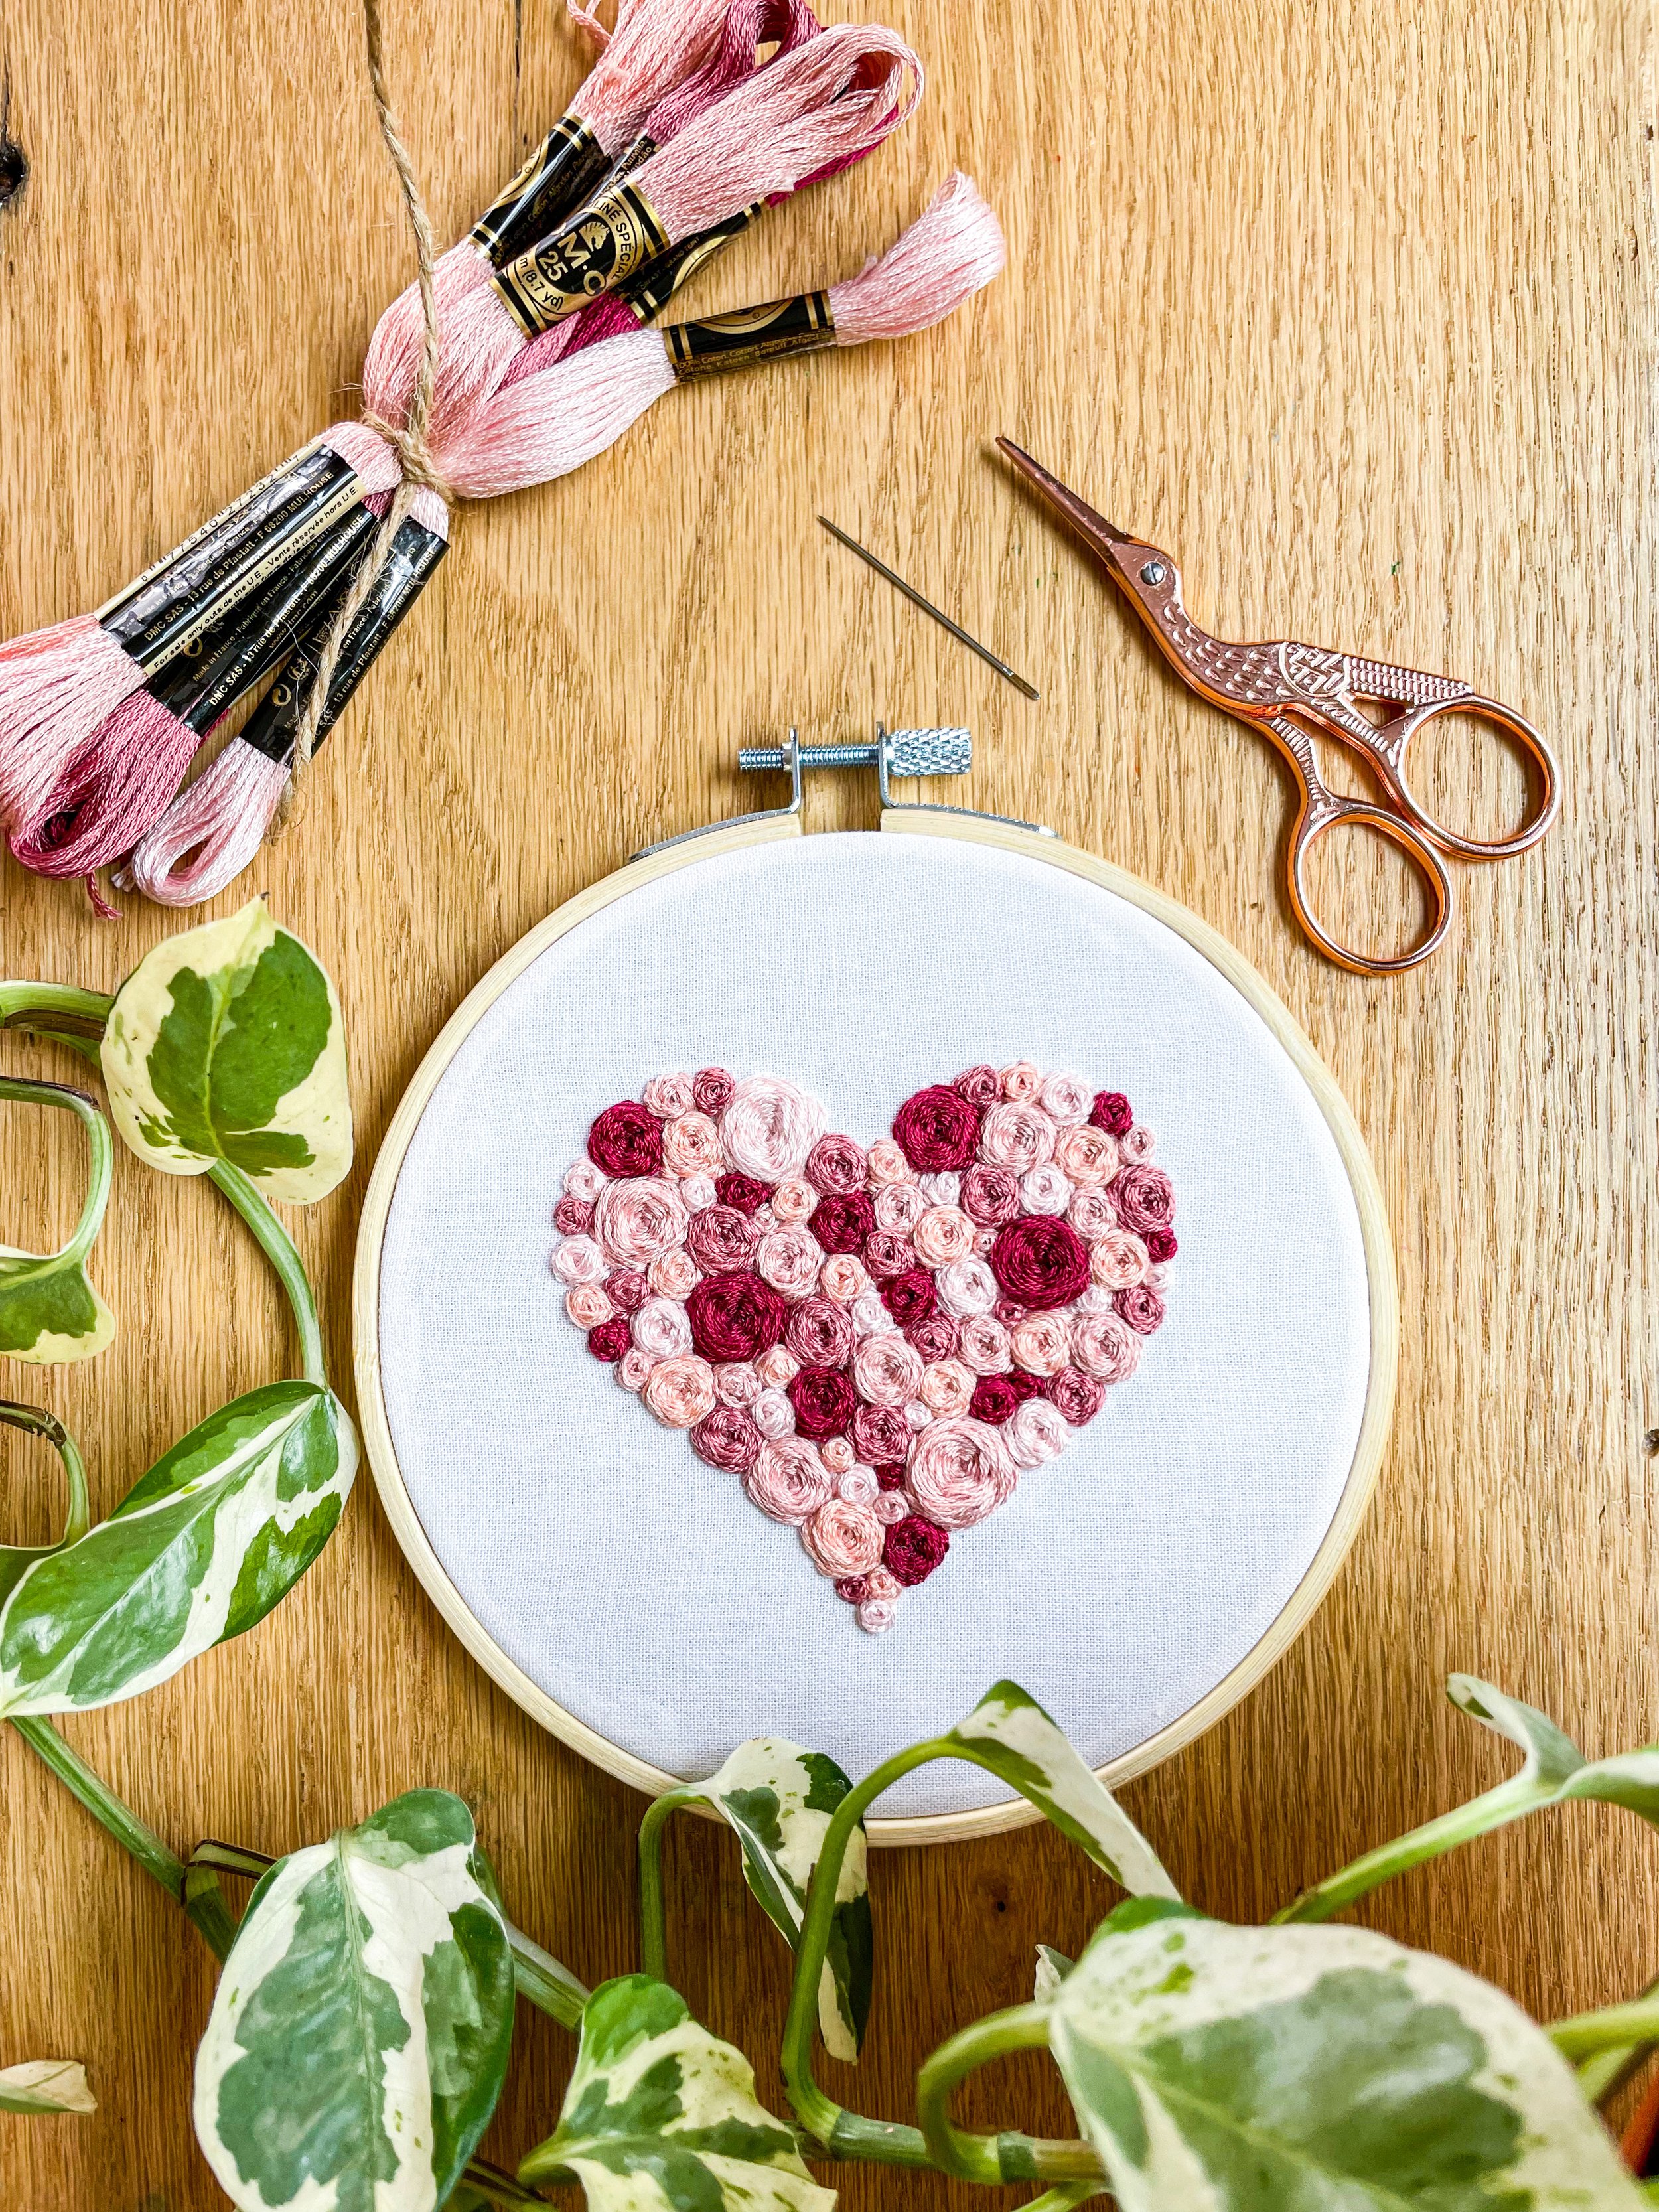 Embroidery Kit for Beginners with Pink Floral Design - Learn to